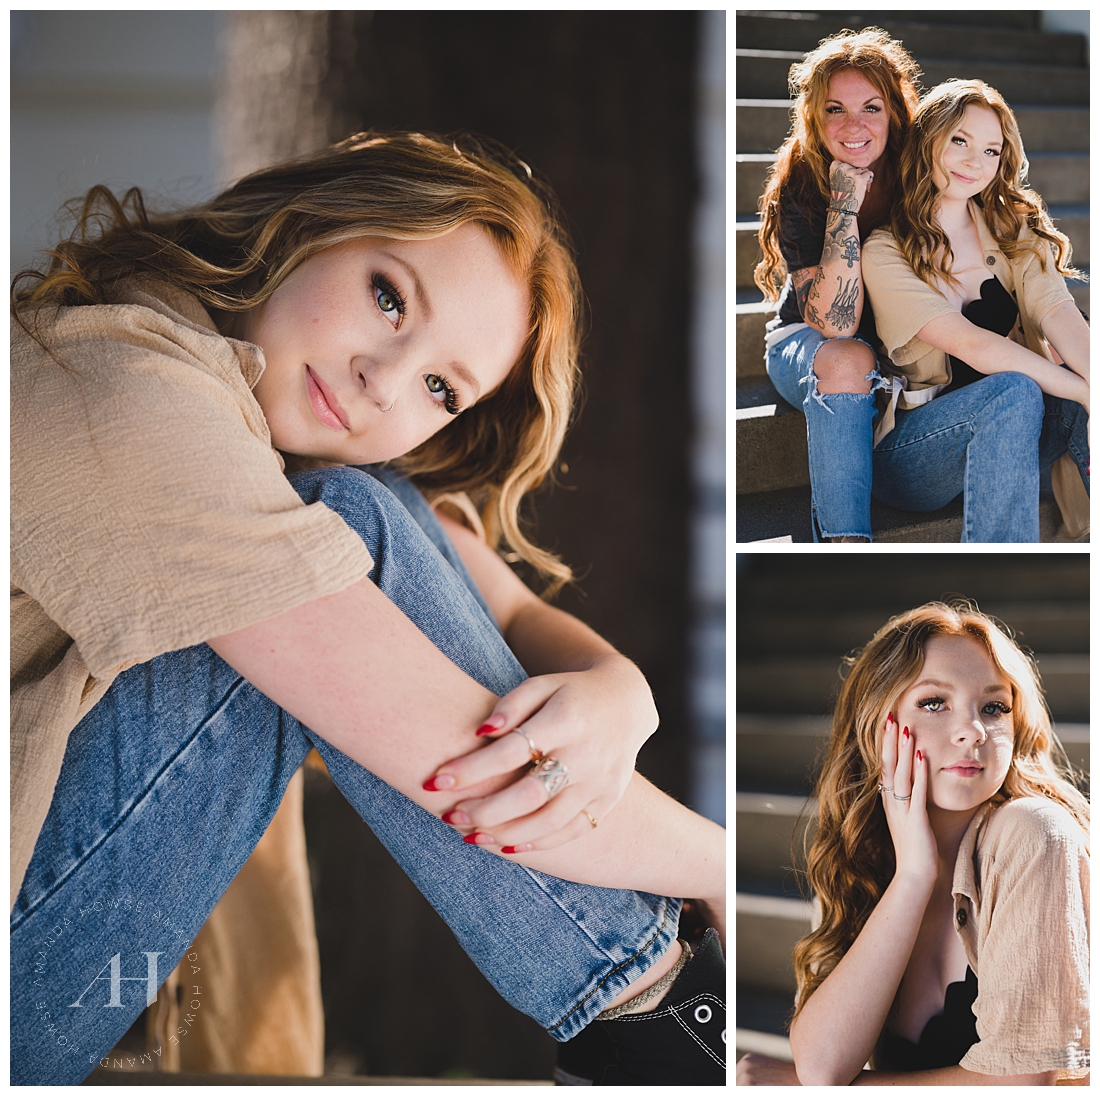 Senior Portraits | Casual Outfit Ideas, Hair and Makeup Ideas for Senior Photos  | Photographed by the Best Tacoma Senior Portrait Photographer Amanda Howse Photography